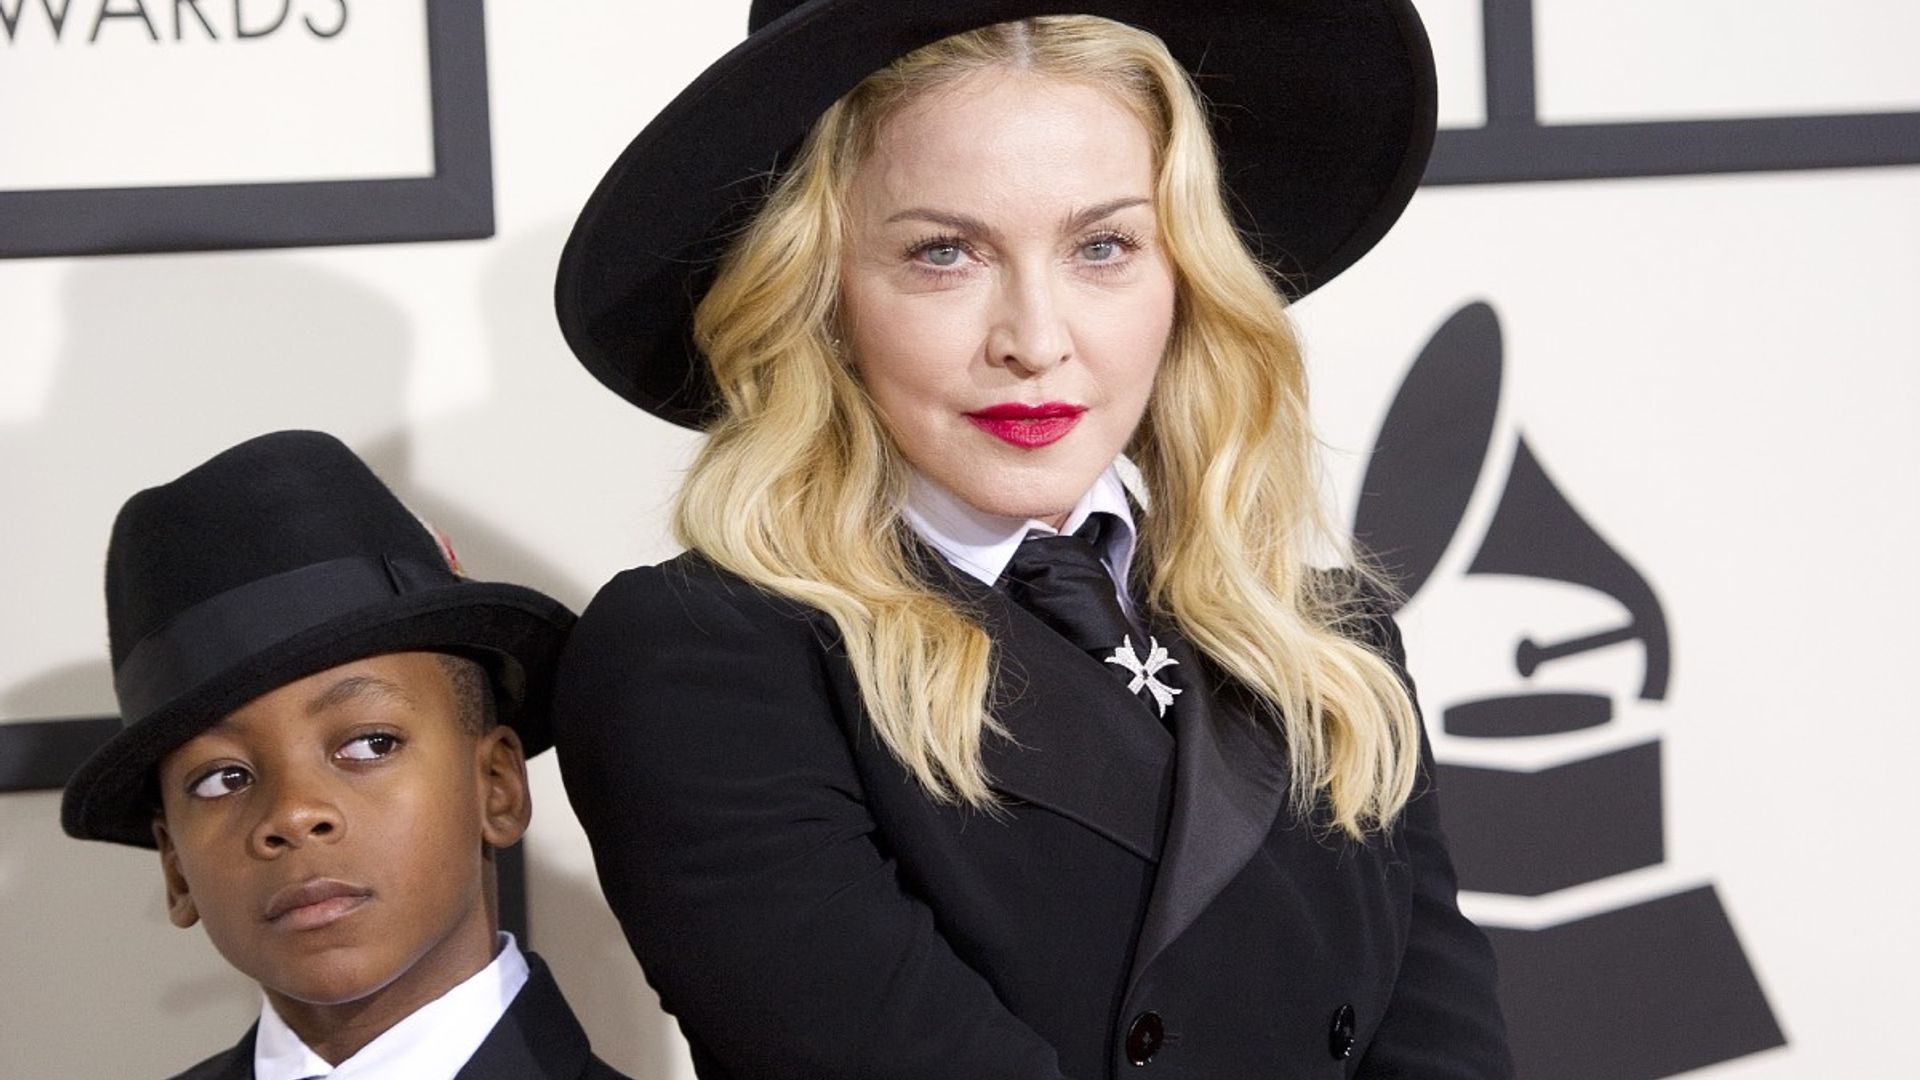 New video reveals Madonna’s incredible home – and that there’s more than one singer in the household